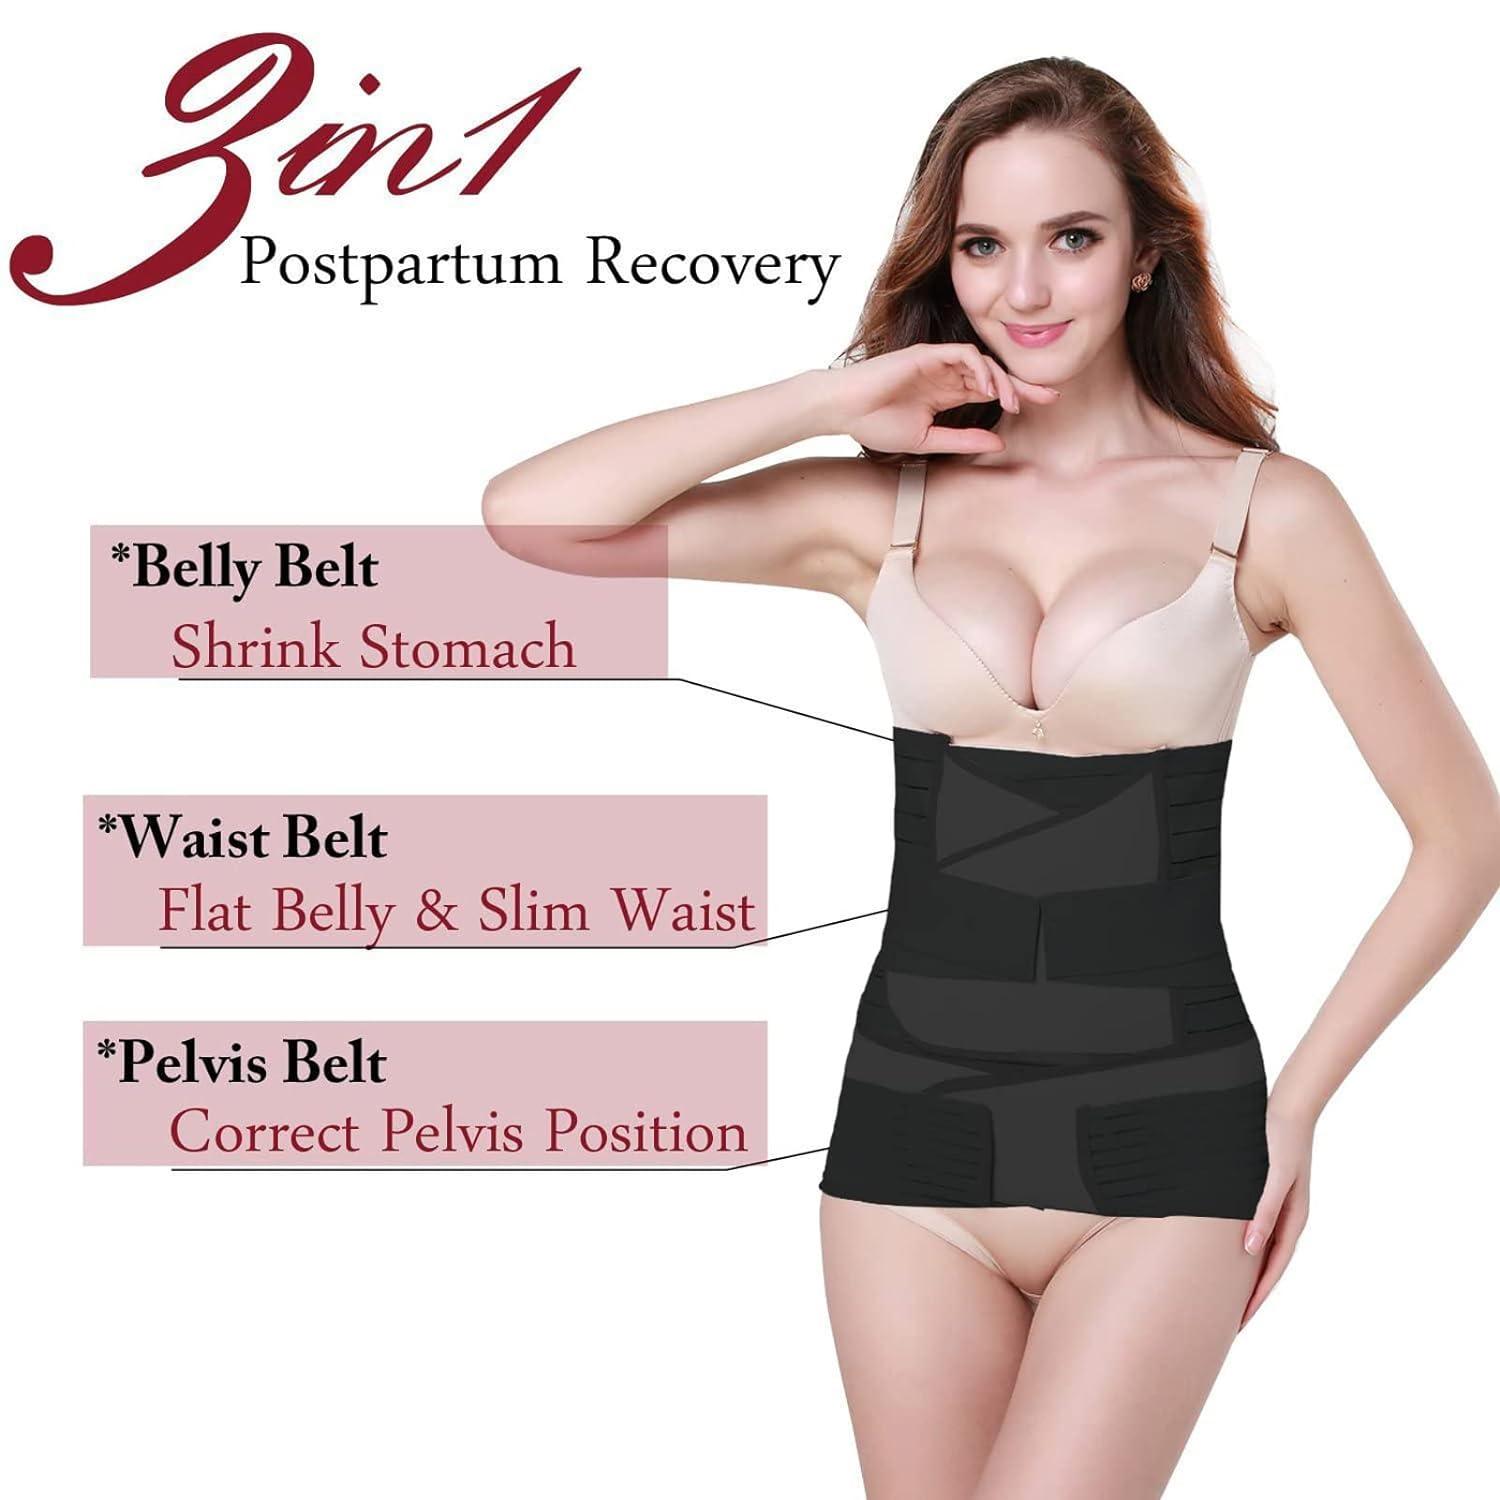 TiRain 3 in 1 Postpartum Belly Support Recovery Belly/Waist/Pelvis